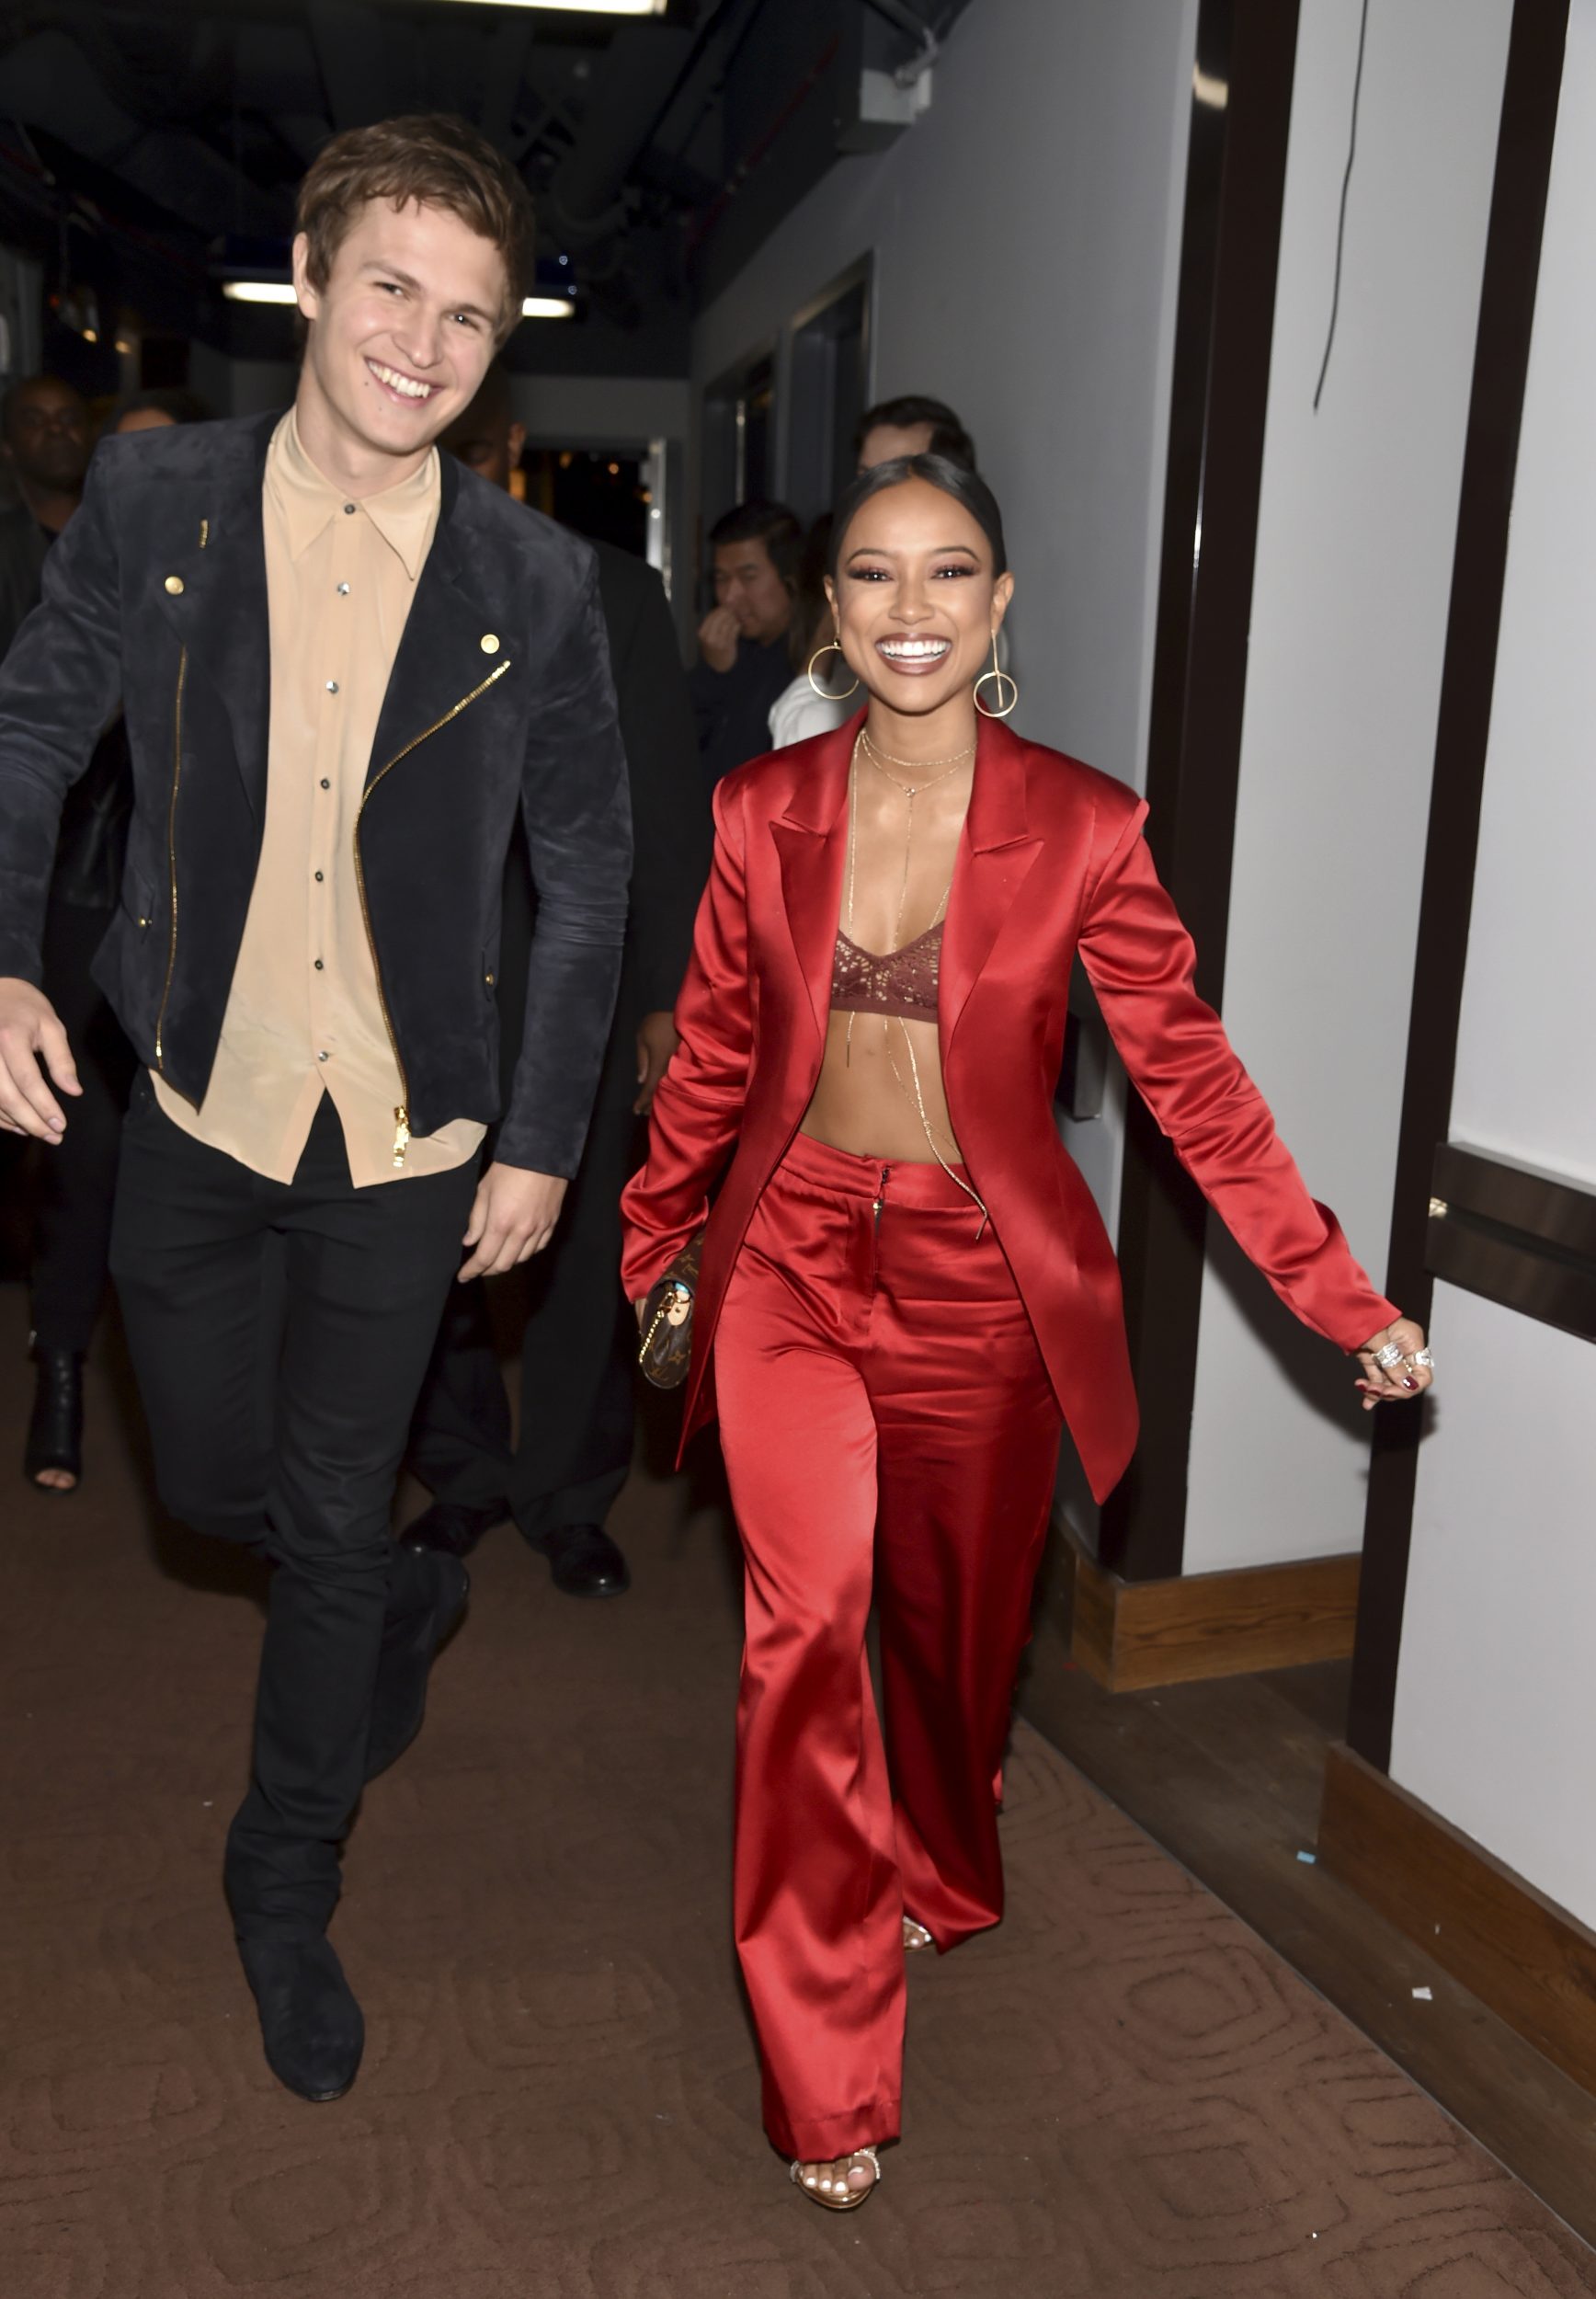 INGLEWOOD, CA - MARCH 05: Actor Ansel Elgort, (L) and model Karrueche Tran seen backstage at the 2017 iHeartRadio Music Awards which broadcast live on Turner's TBS, TNT, and truTV at The Forum on March 5, 2017 in Inglewood, California. (Photo by Frazer Harrison/Getty Images for iHeartMedia) *** Local Caption *** Ansel Elgort; Karrueche Tran